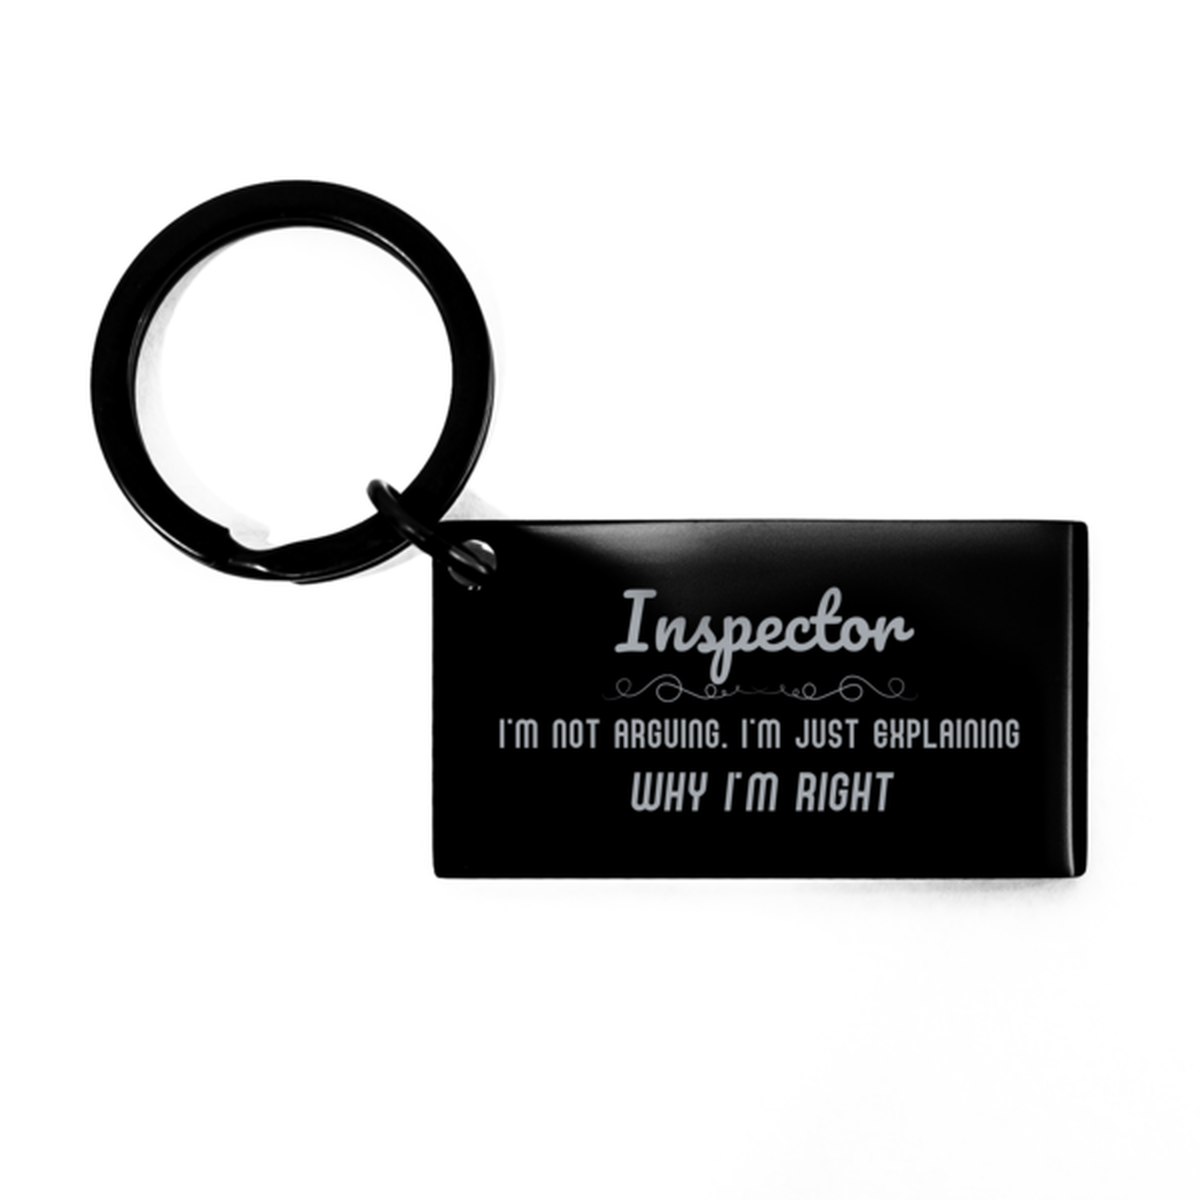 Inspector I'm not Arguing. I'm Just Explaining Why I'm RIGHT Keychain, Funny Saying Quote Inspector Gifts For Inspector Graduation Birthday Christmas Gifts for Men Women Coworker